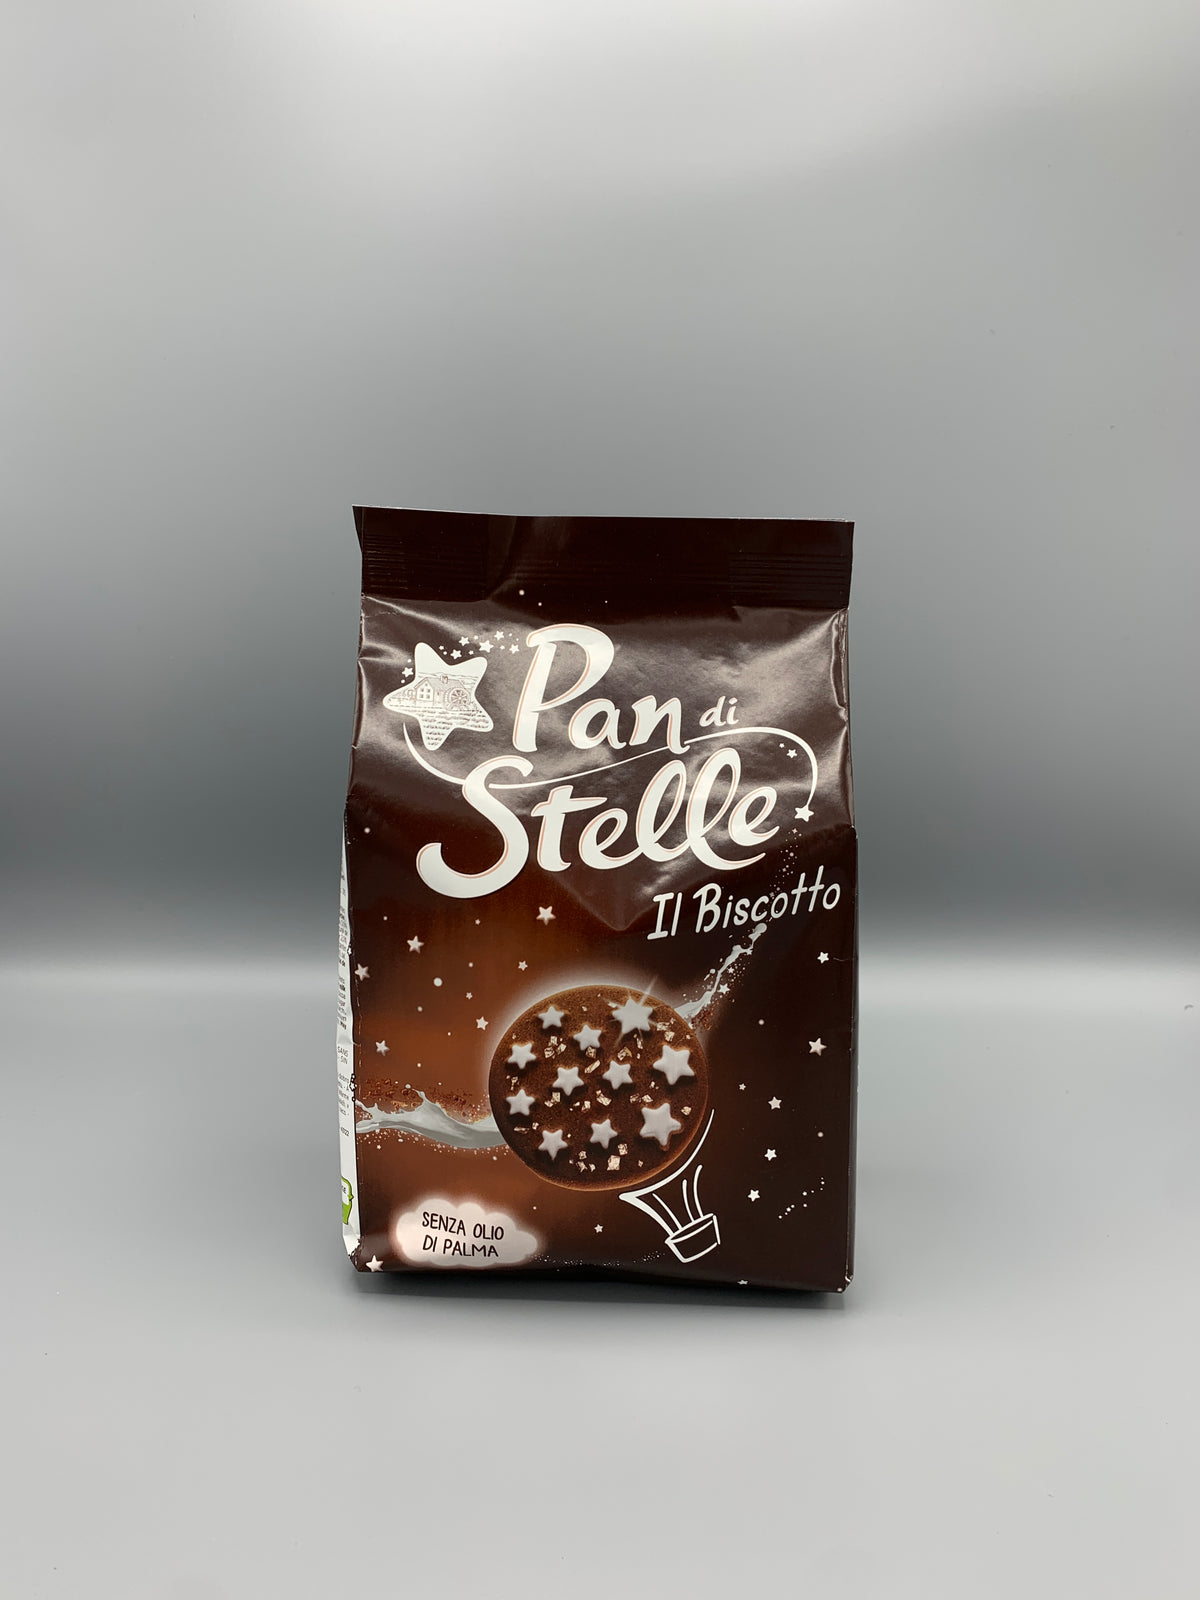 Pan di Stelle - Chocolate Biscuits by Mulino Bianco 350g